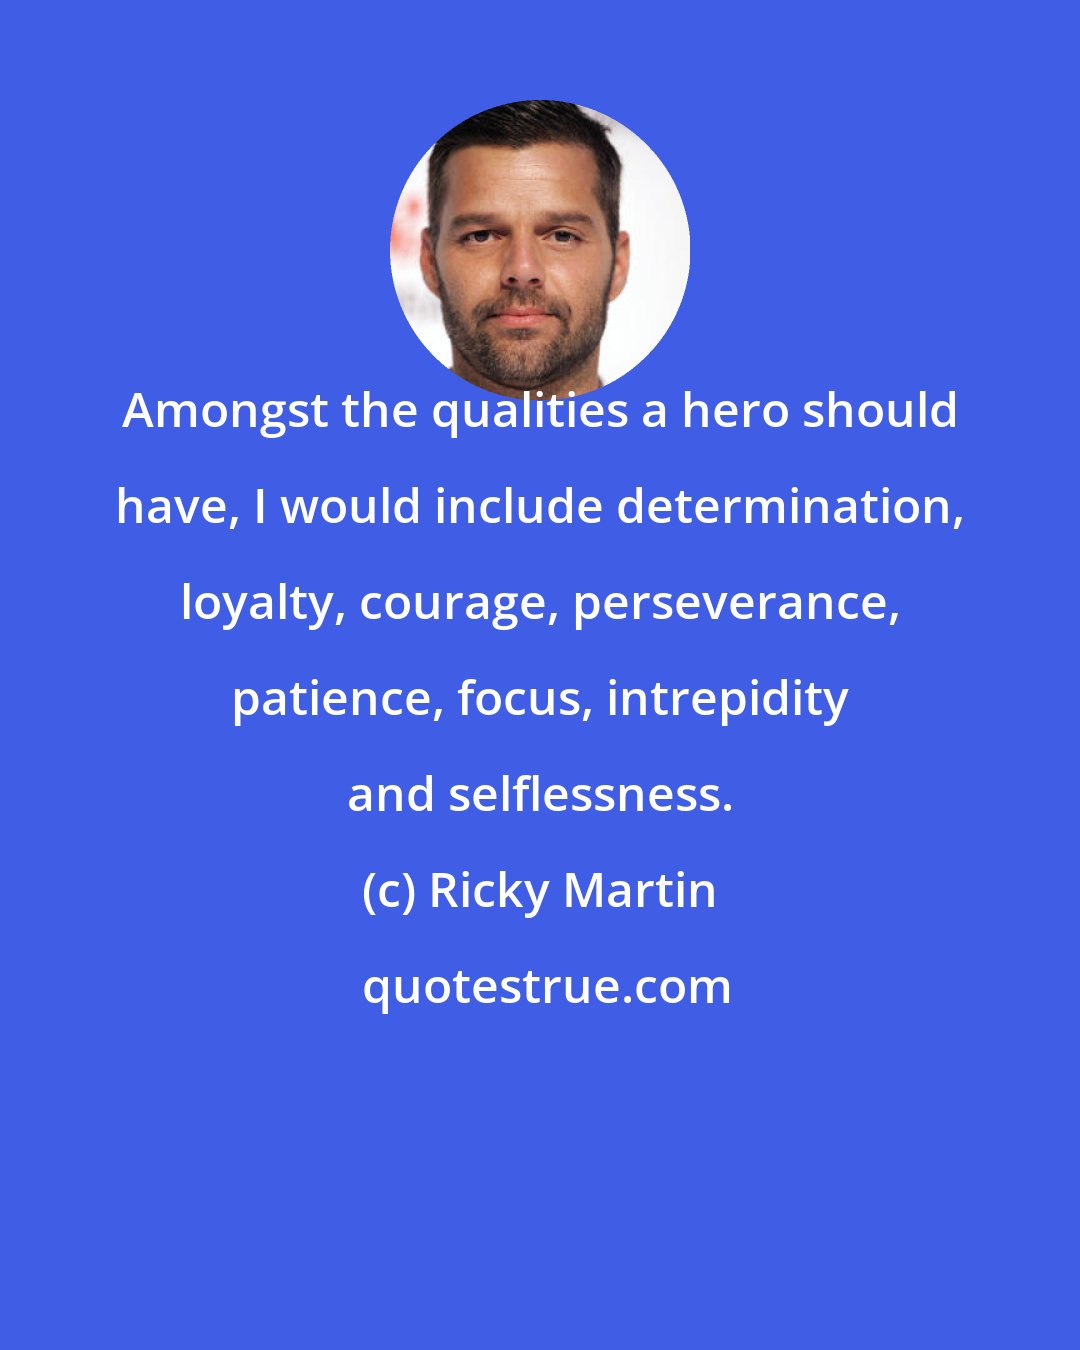 Ricky Martin: Amongst the qualities a hero should have, I would include determination, loyalty, courage, perseverance, patience, focus, intrepidity and selflessness.